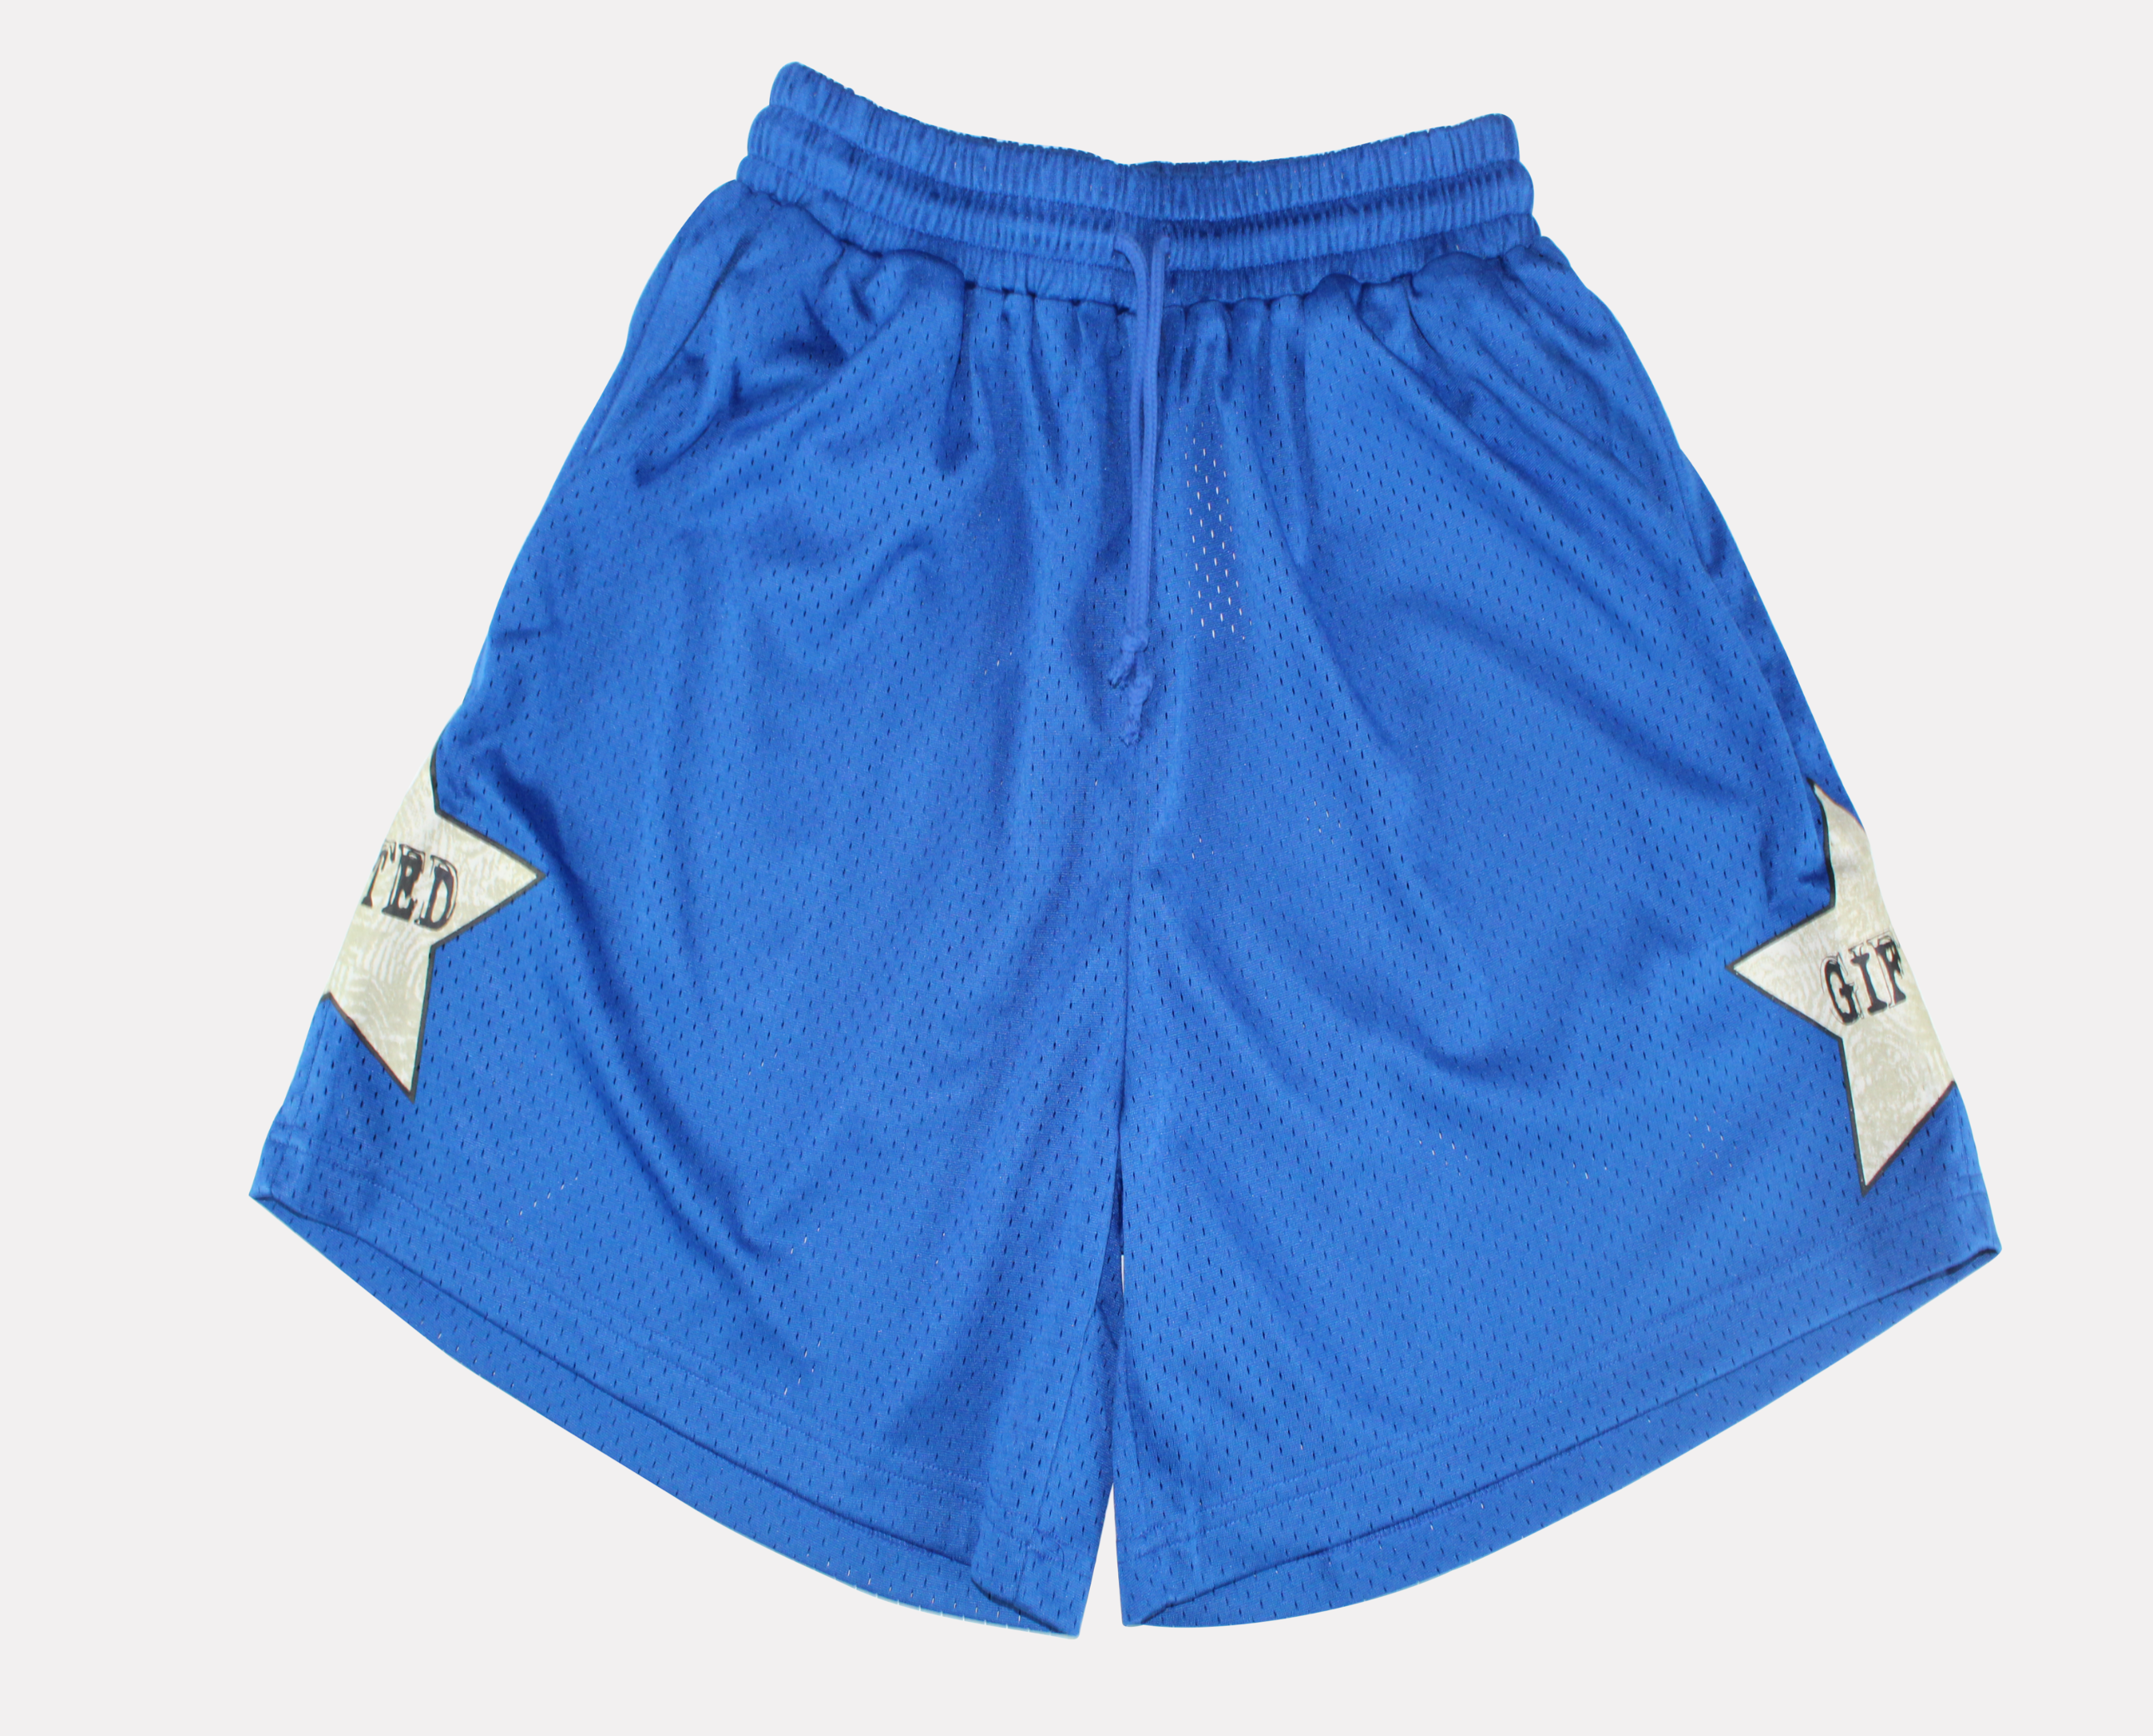 Gifted All Star Shorts (Blue)